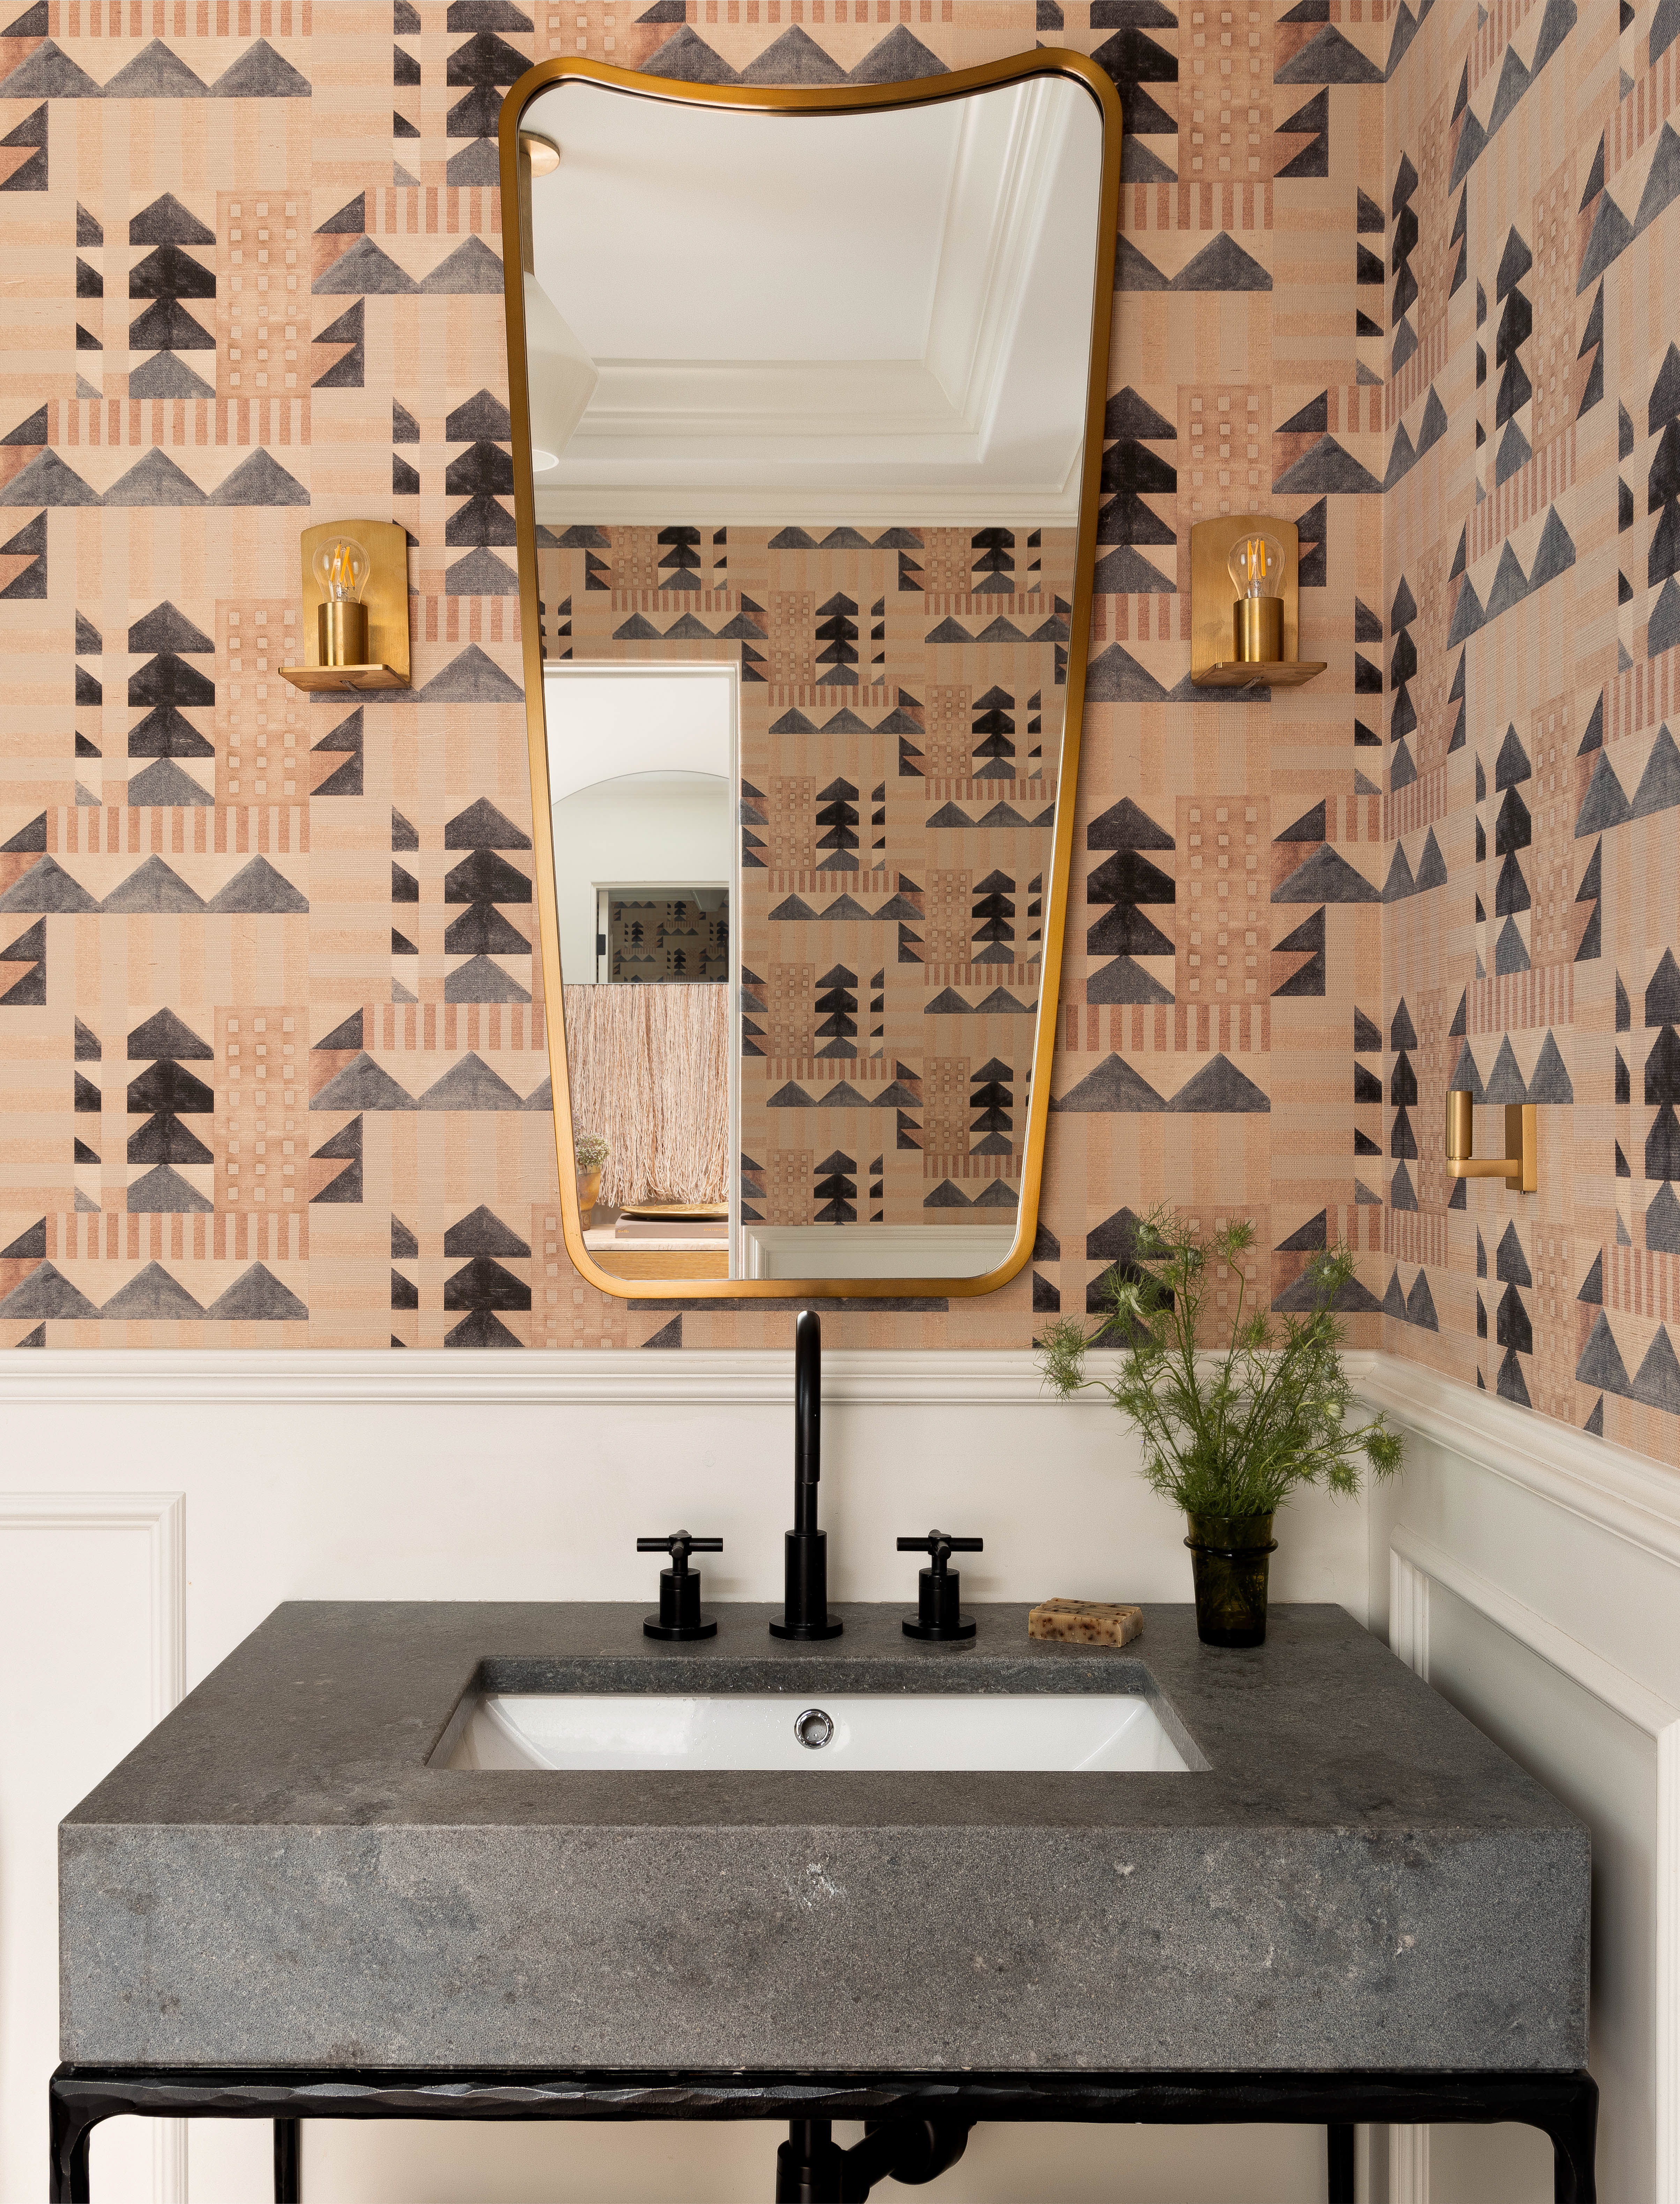 Powder room vanity with geometric wallpaper in dark blues and peach tones. Brass mirror and sconces complement the deep gray marble sink surround.